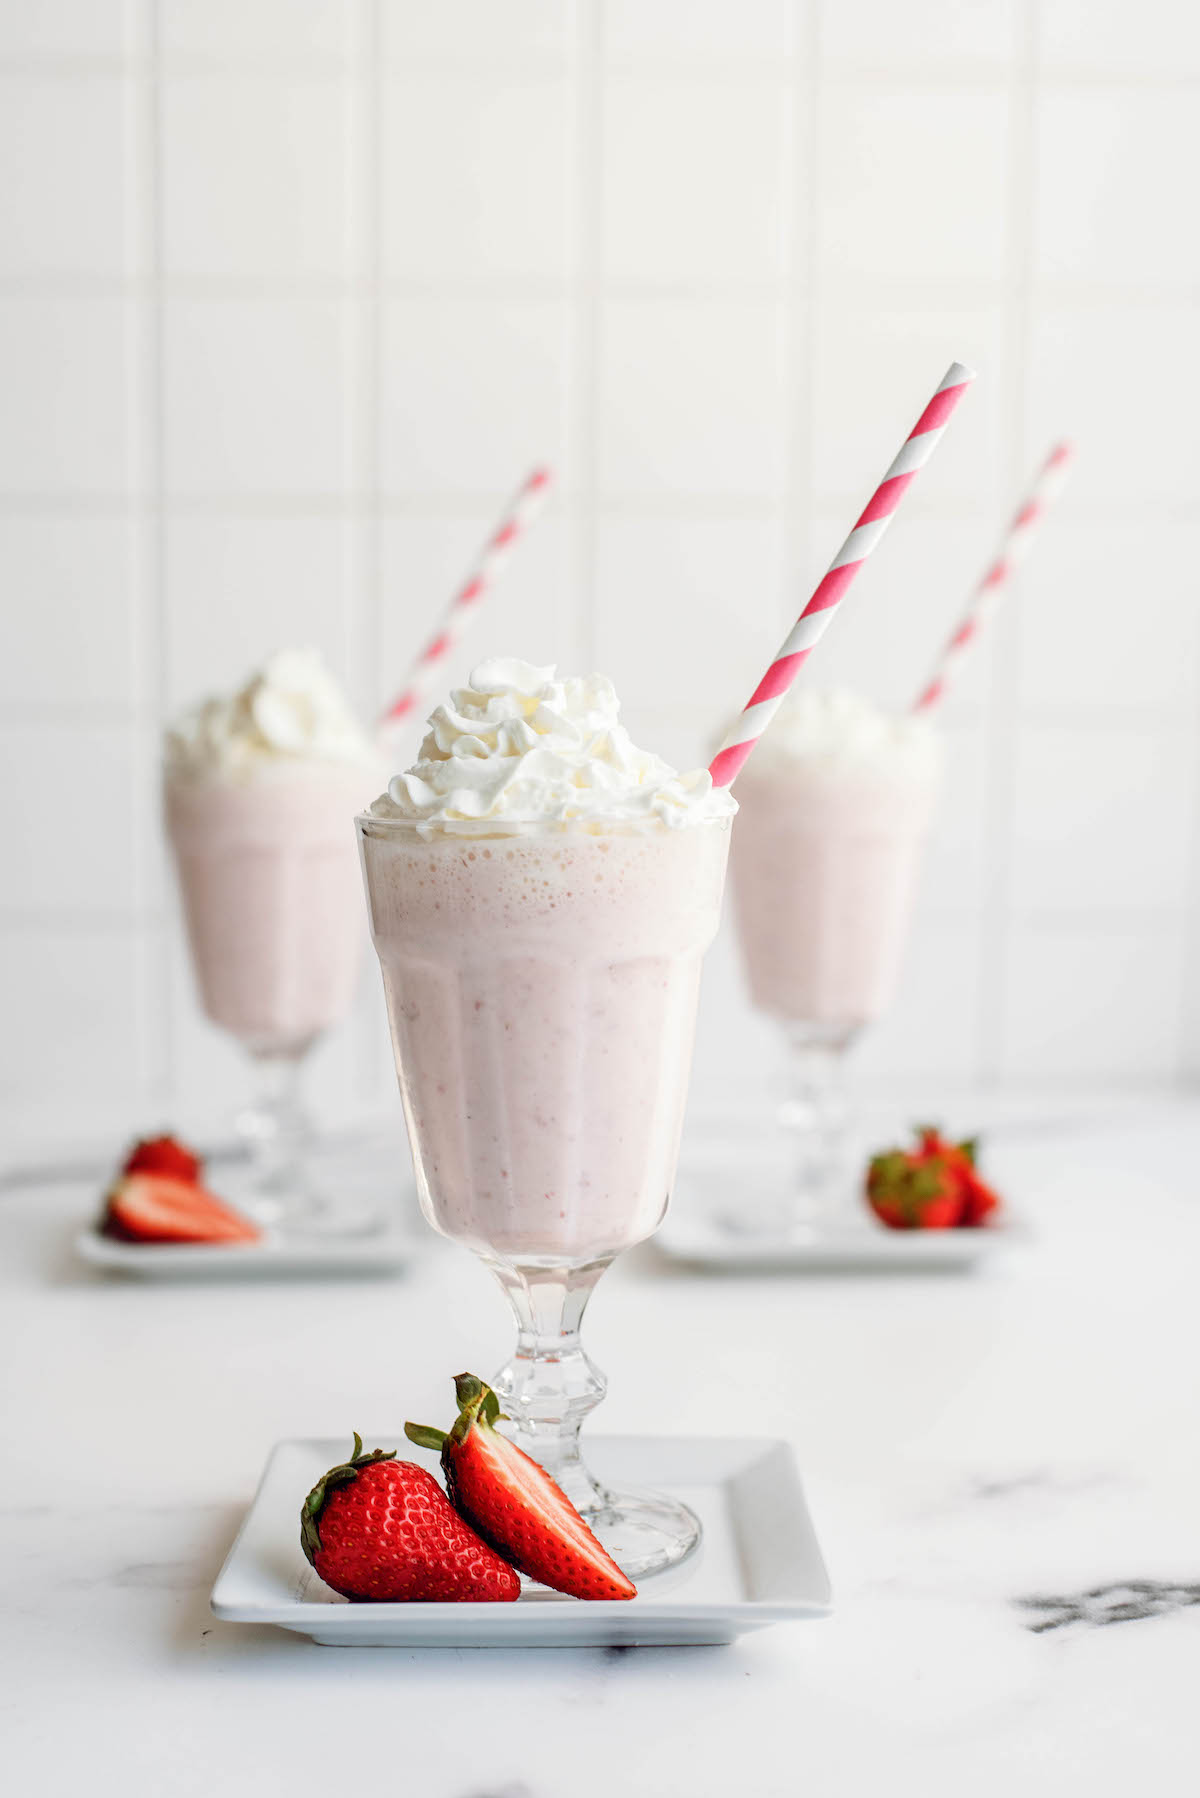 strawberry shake in a glass with a straw and strawberry garnish